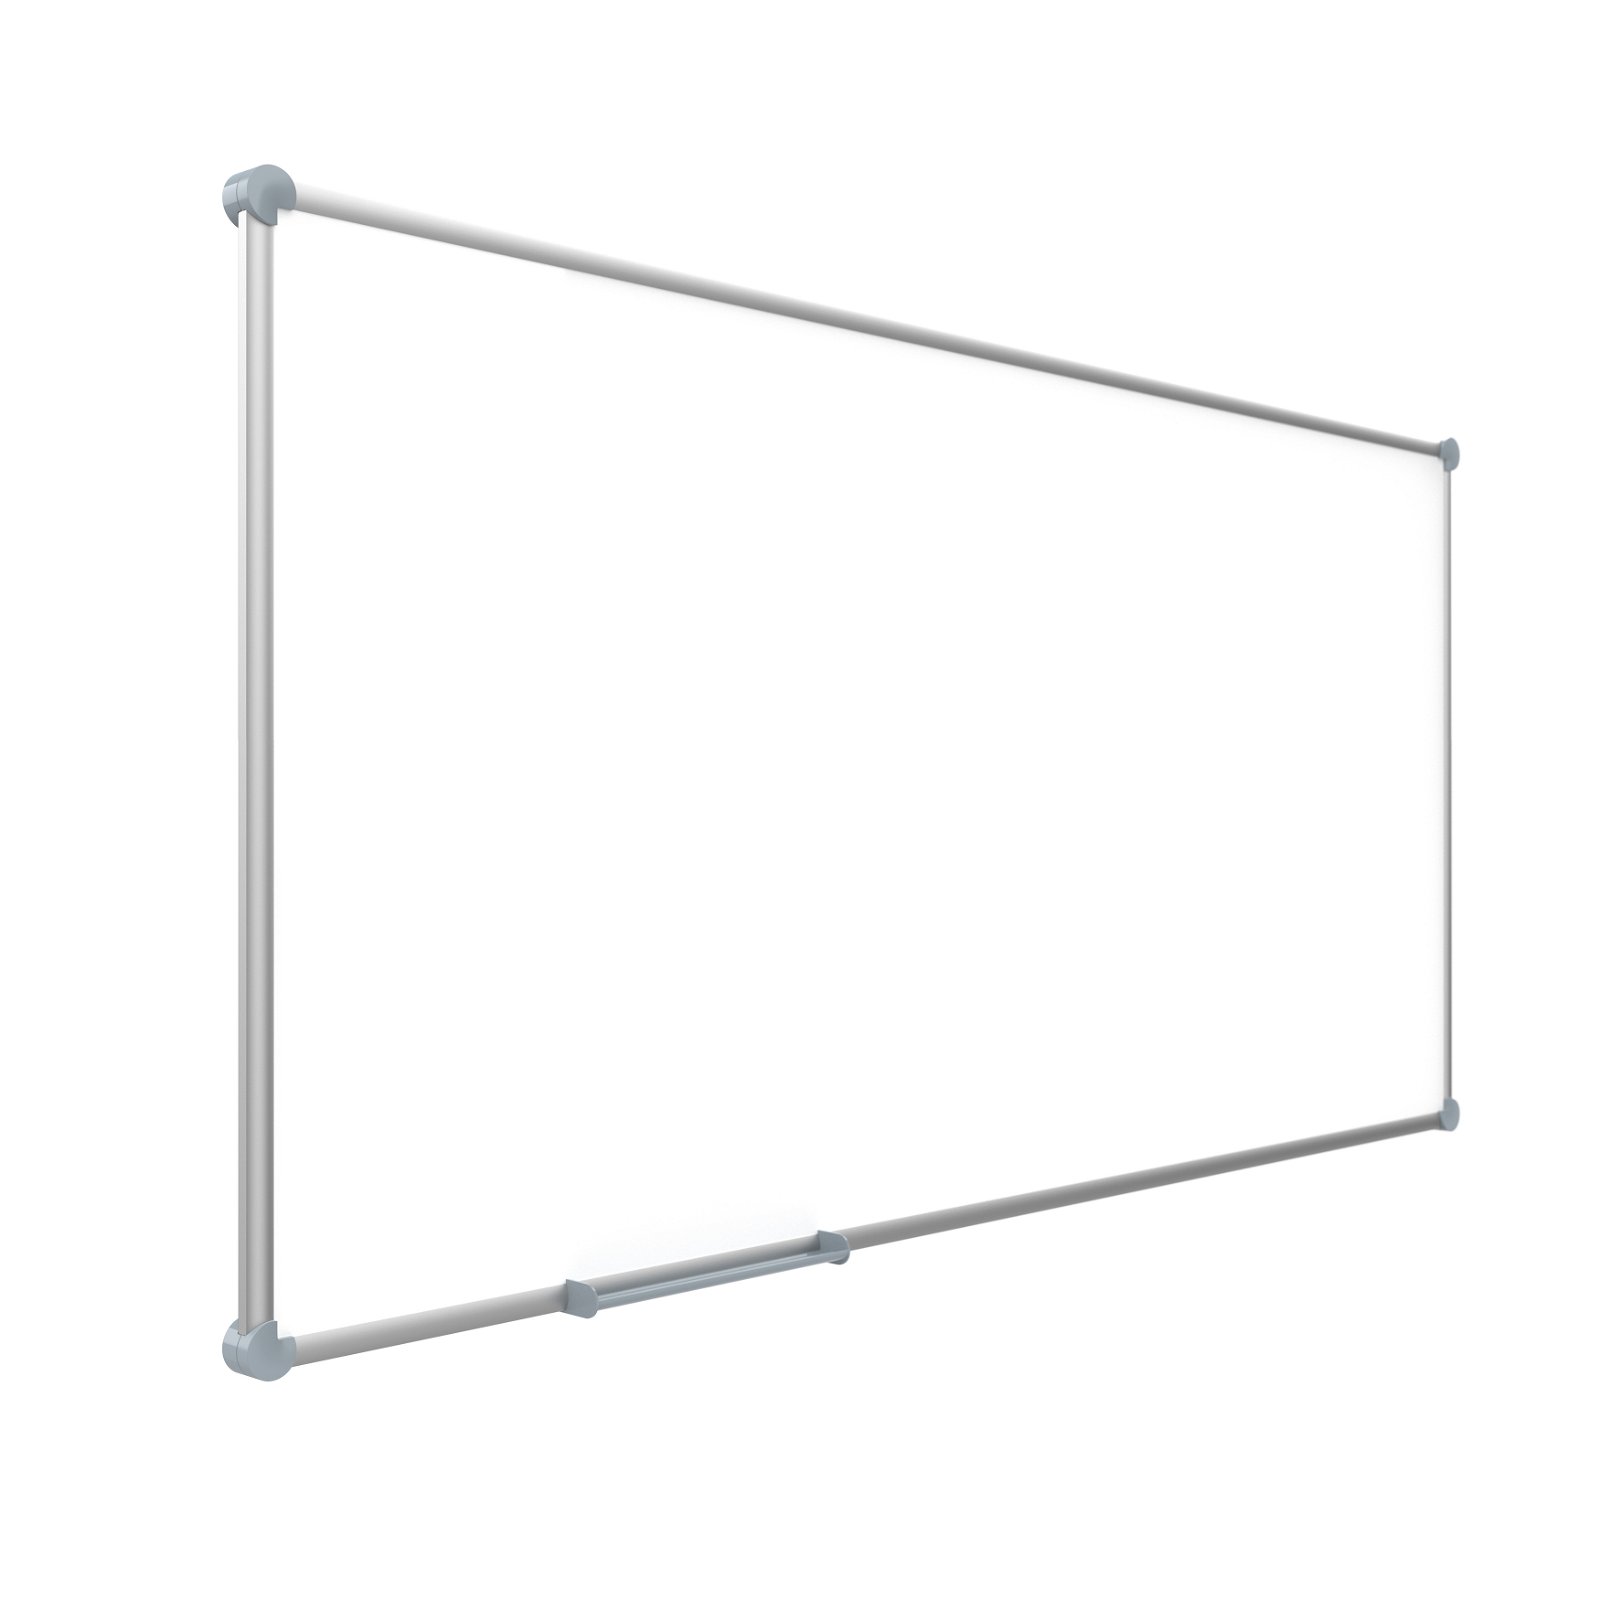 Whiteboard 2000 MAULpro, Emaille